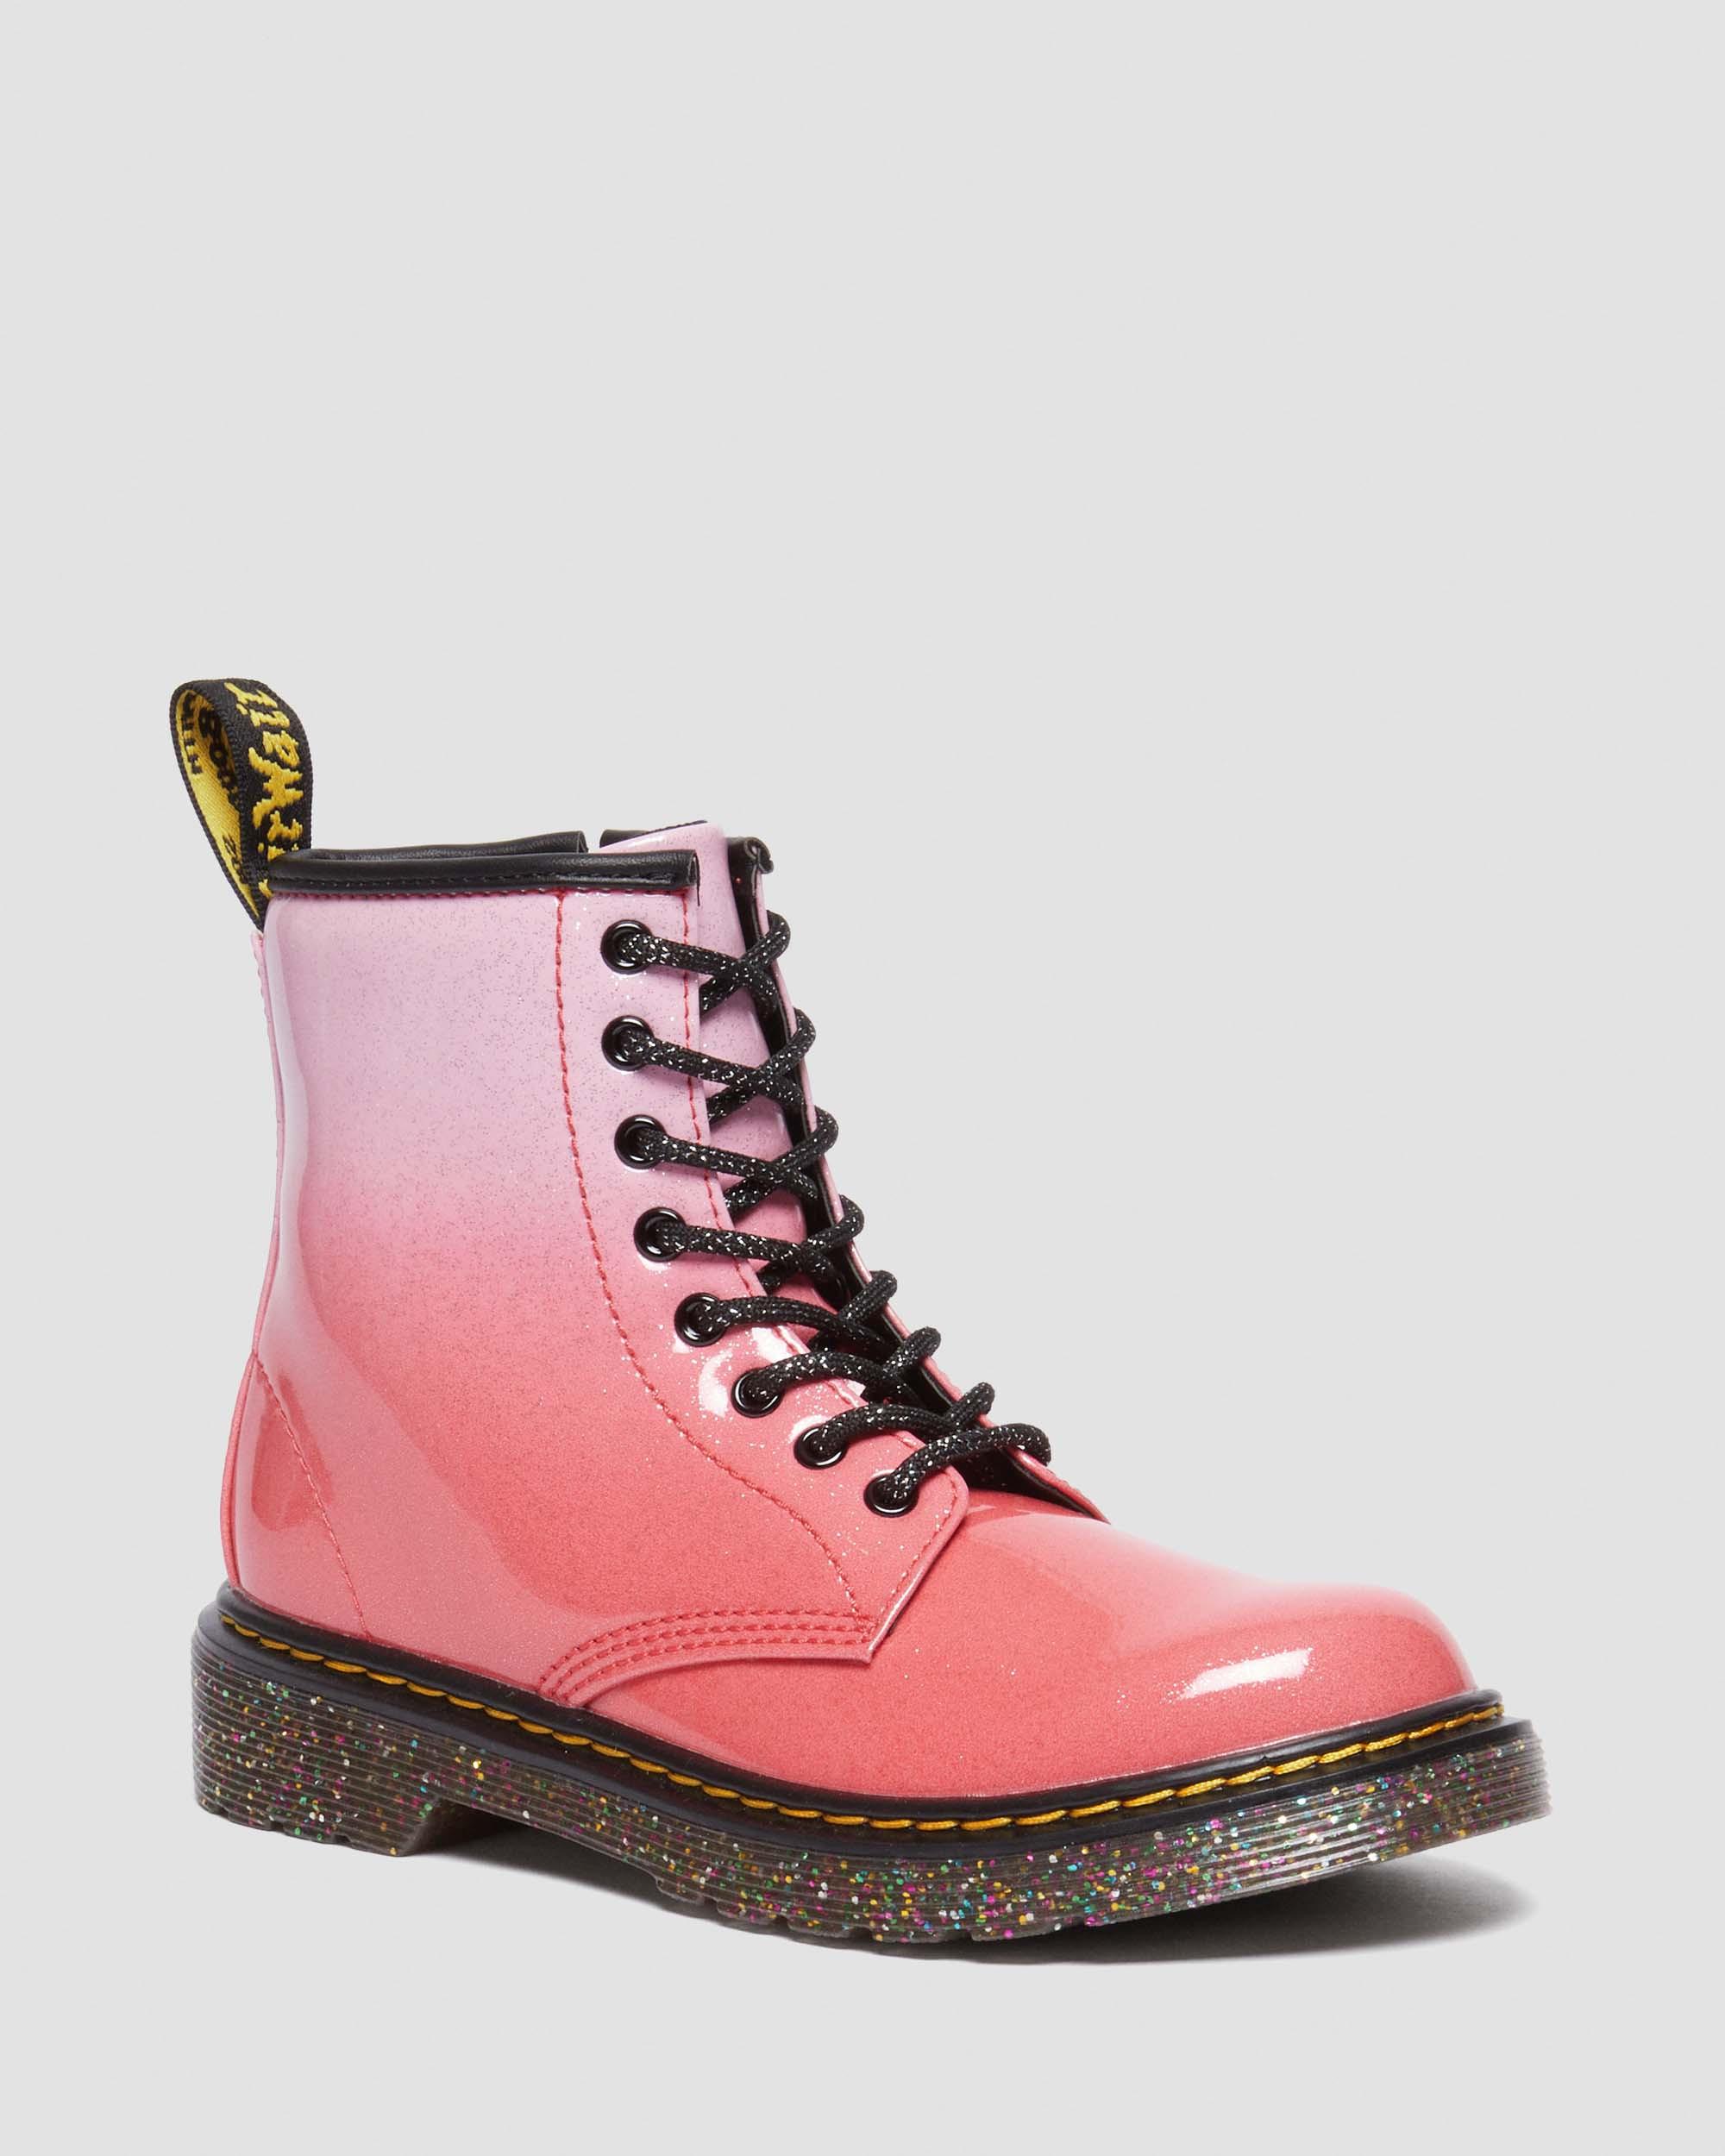 Junior 1460 Gradient Glitter Leather Lace Up Boots in Pink | Dr. Martens